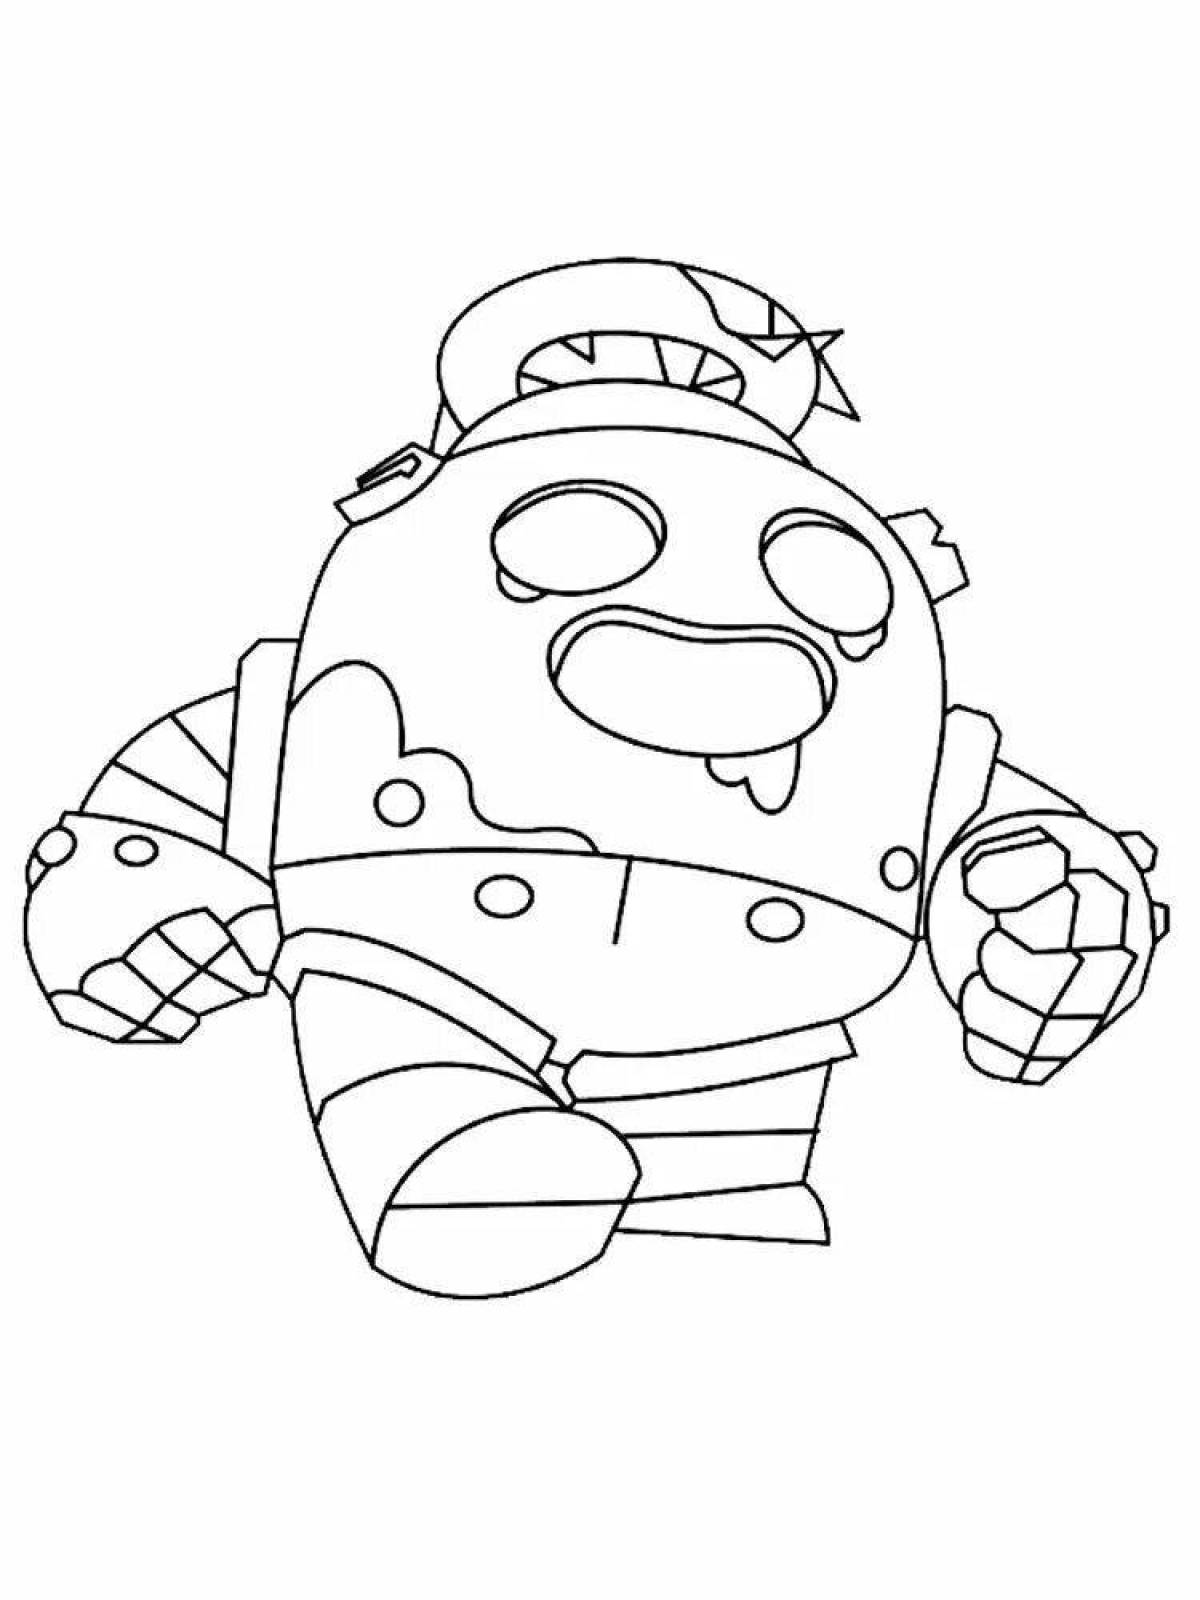 Spike from bravo stars deluxe coloring book